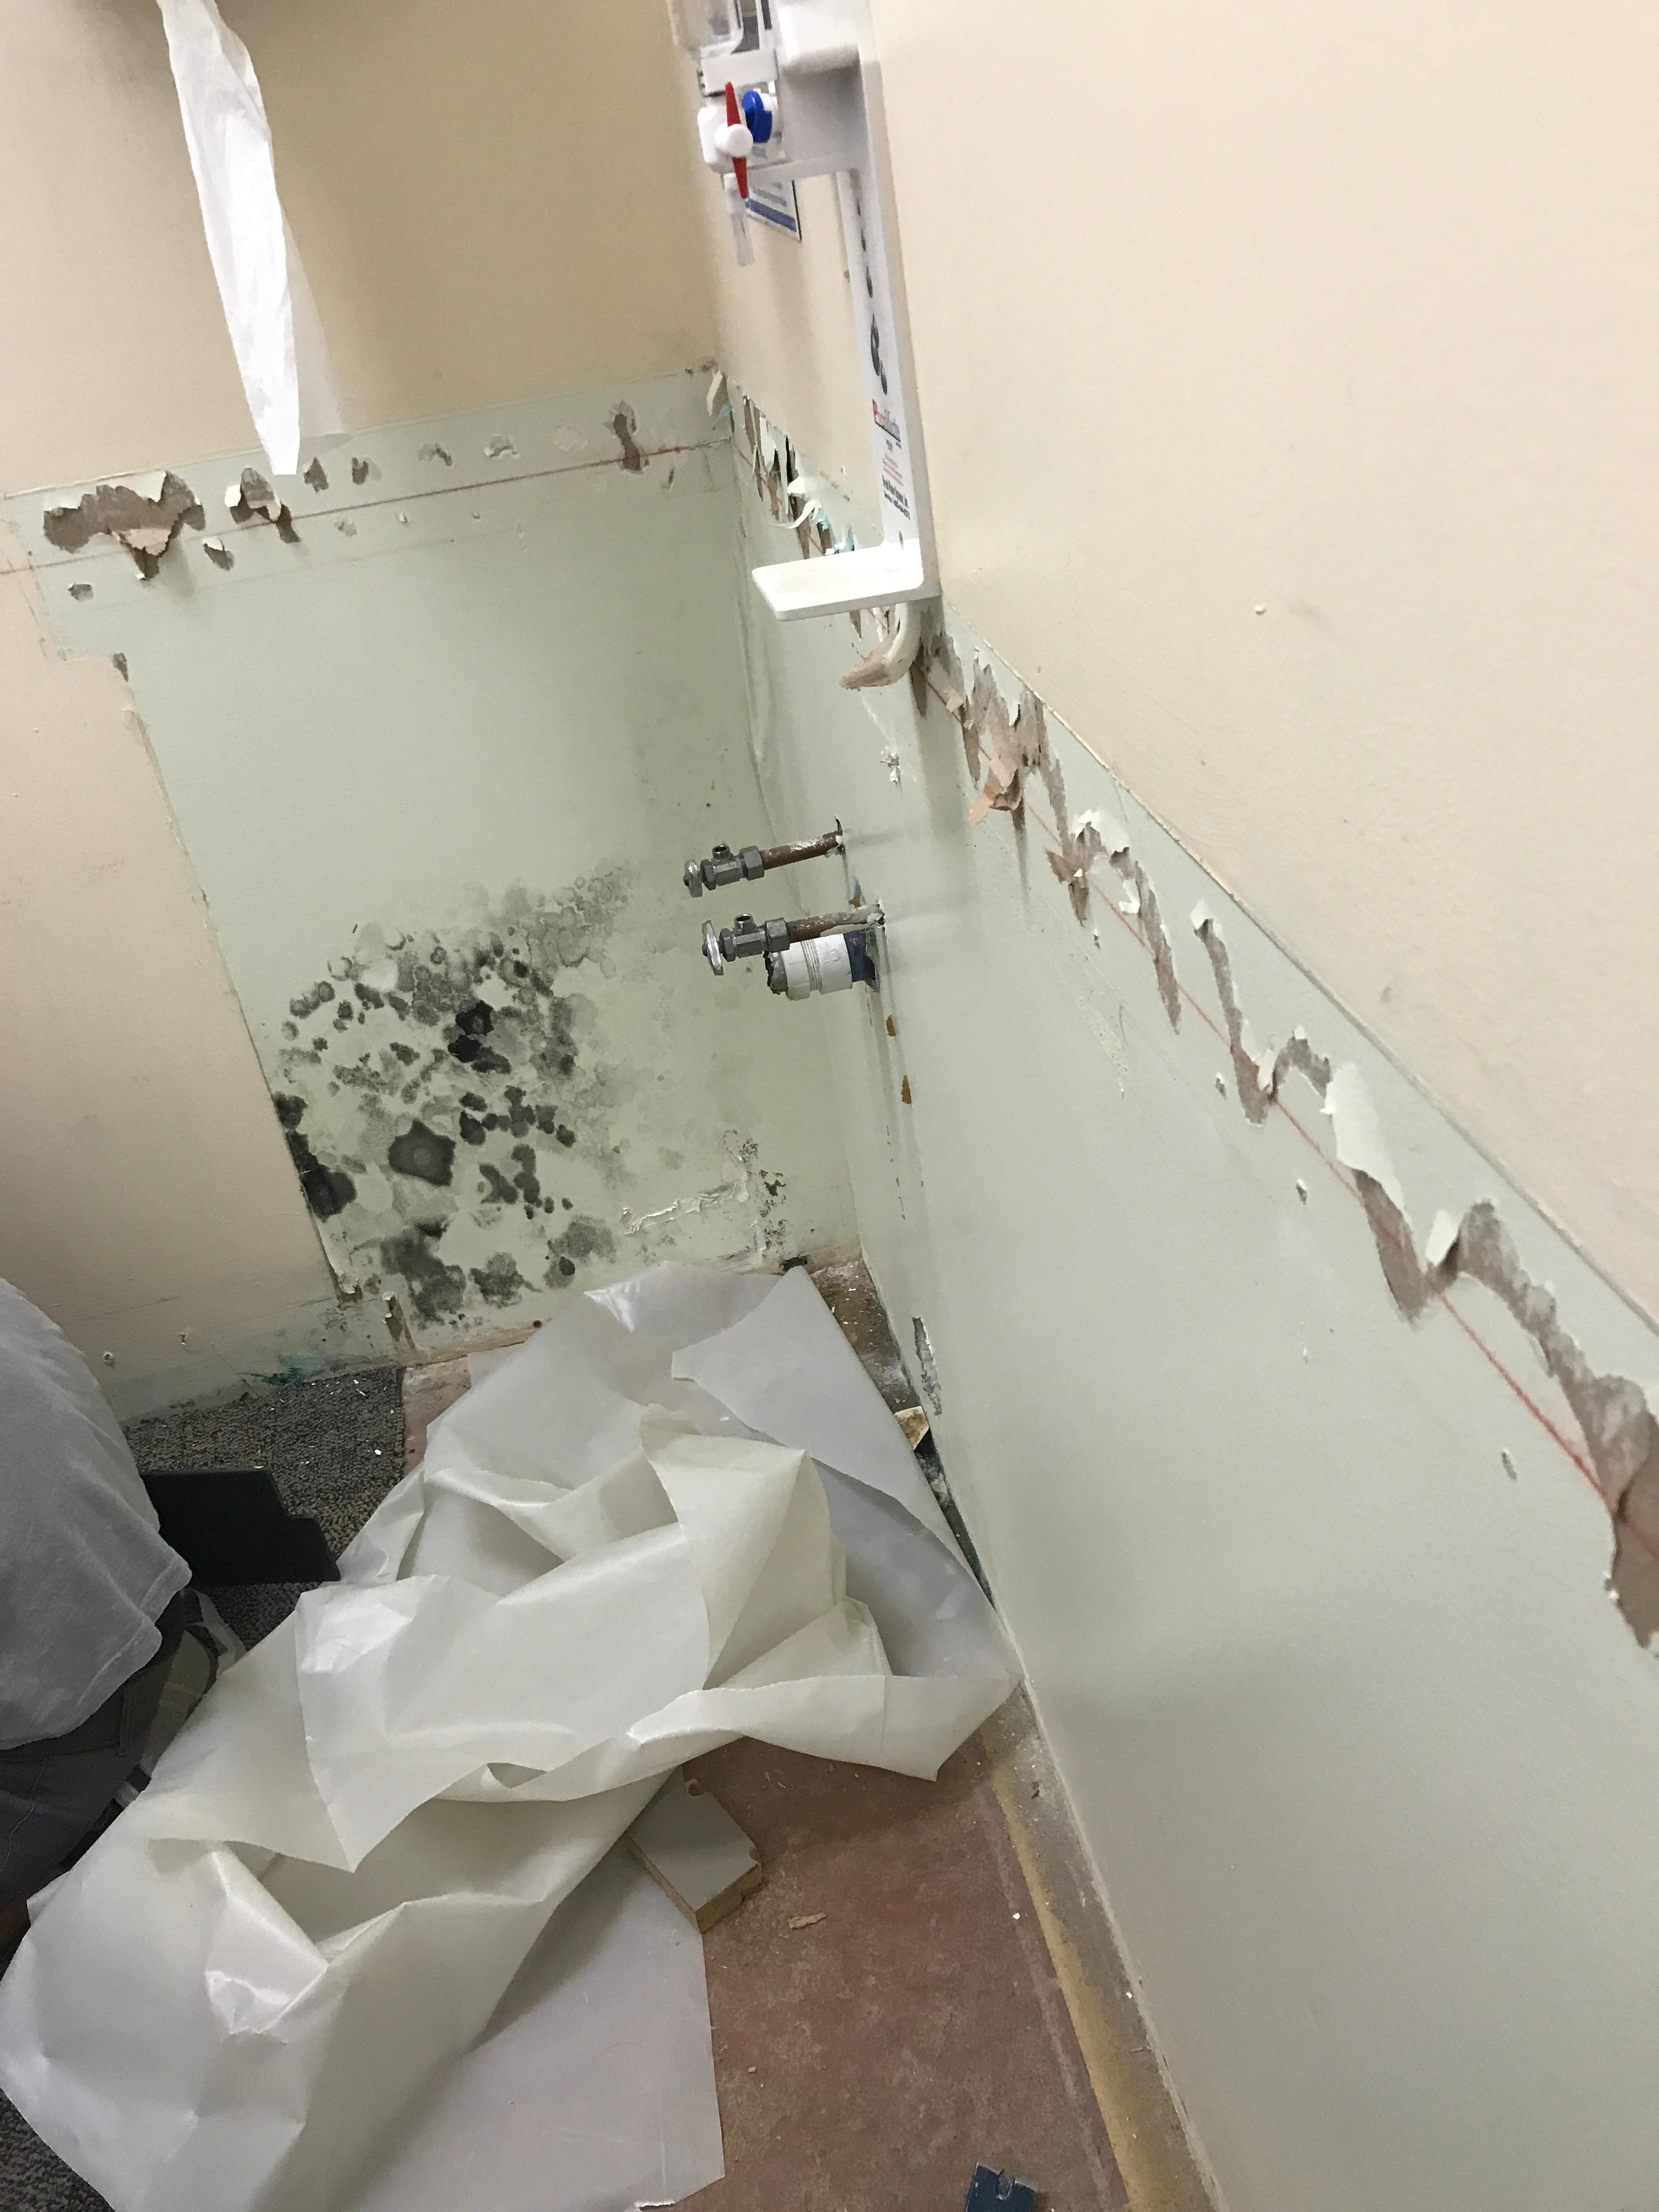 Responding to a commercial mold growth.